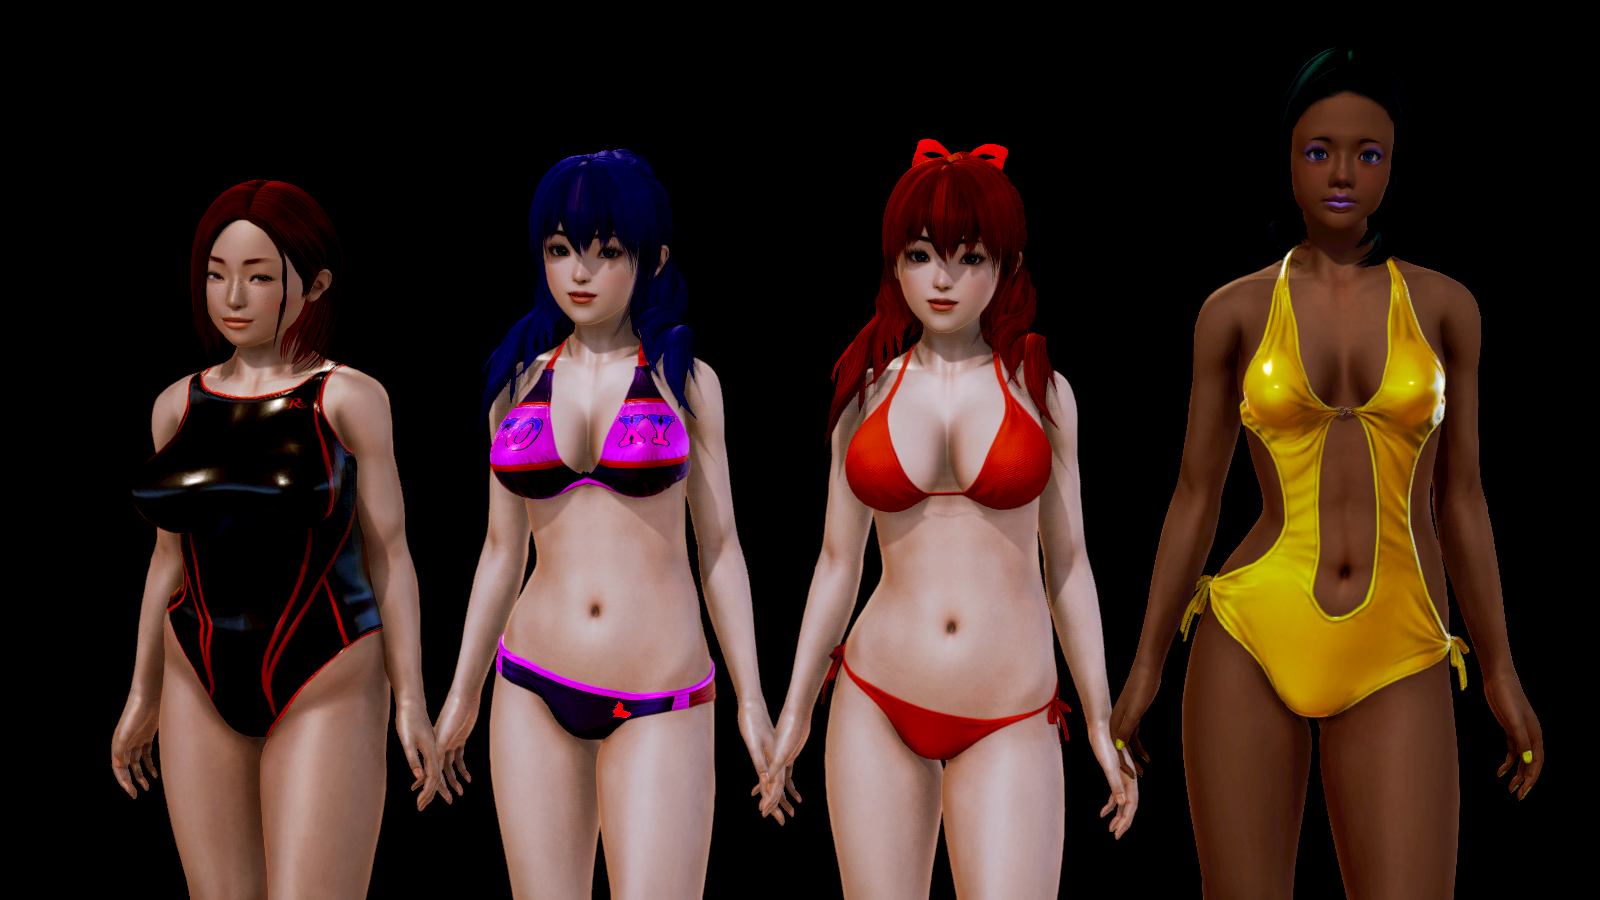 And also some work for already known characters when going to the beach. 